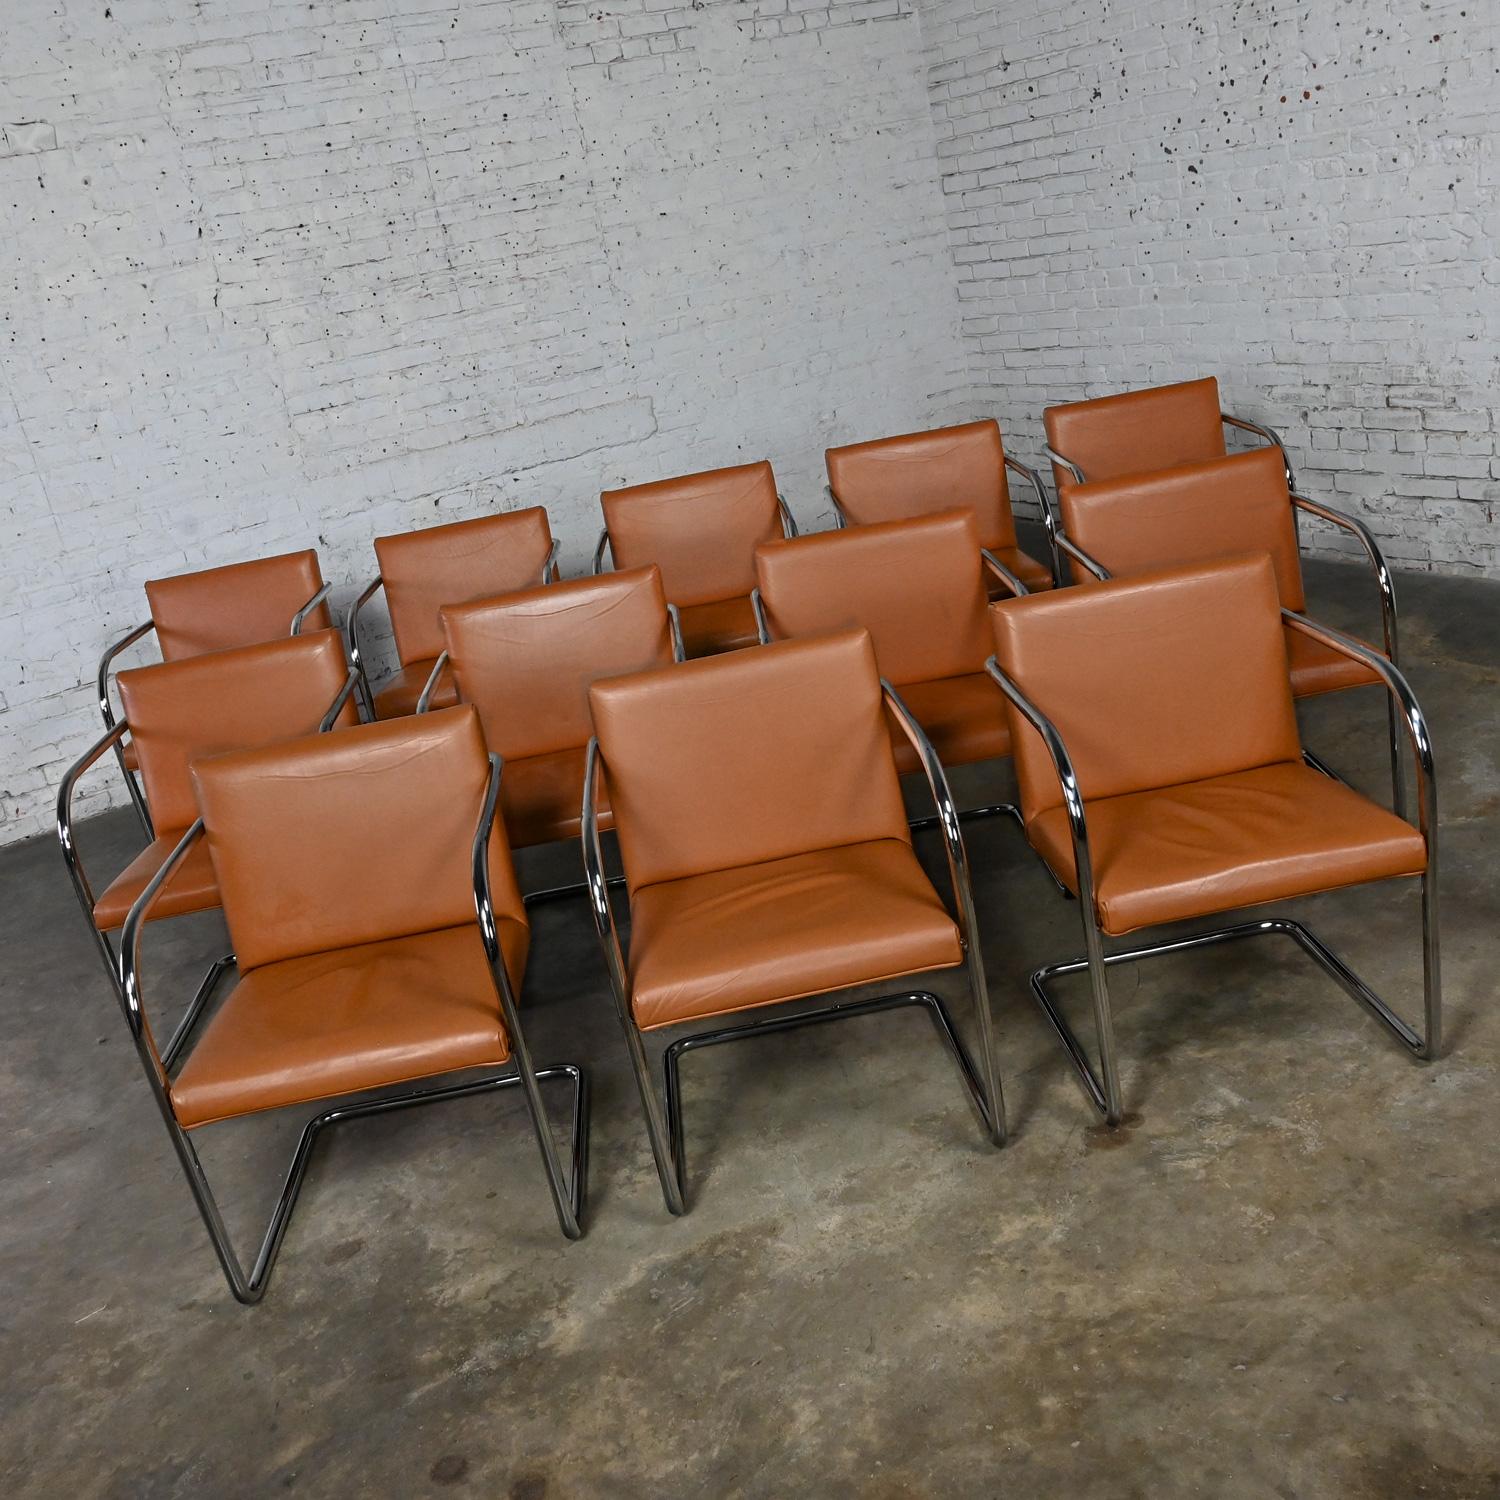 Phenomenal Bauhaus style Thonet chrome tube cantilever frame & cognac leather armchairs in the style of Brno chair by Mies van der Rohe, & Lilly Reich, set of 12. Beautiful condition, keeping in mind that these are vintage and not new so will have